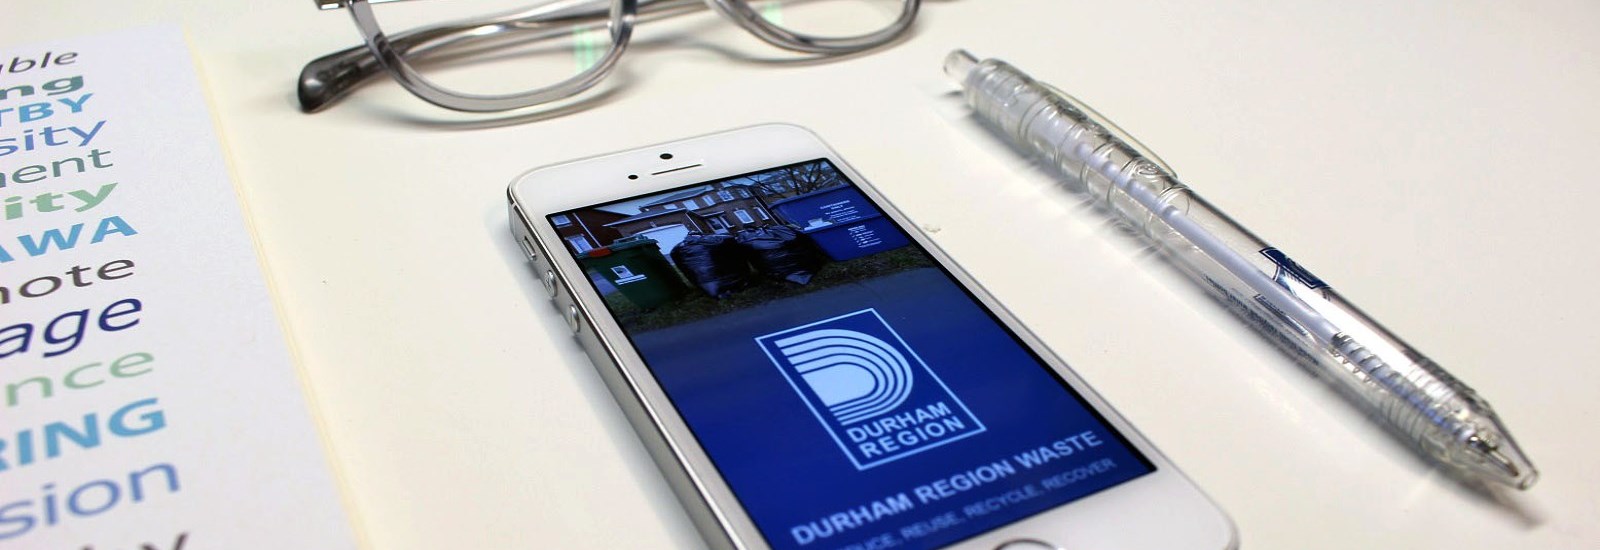 Durham Waste App on mobile device